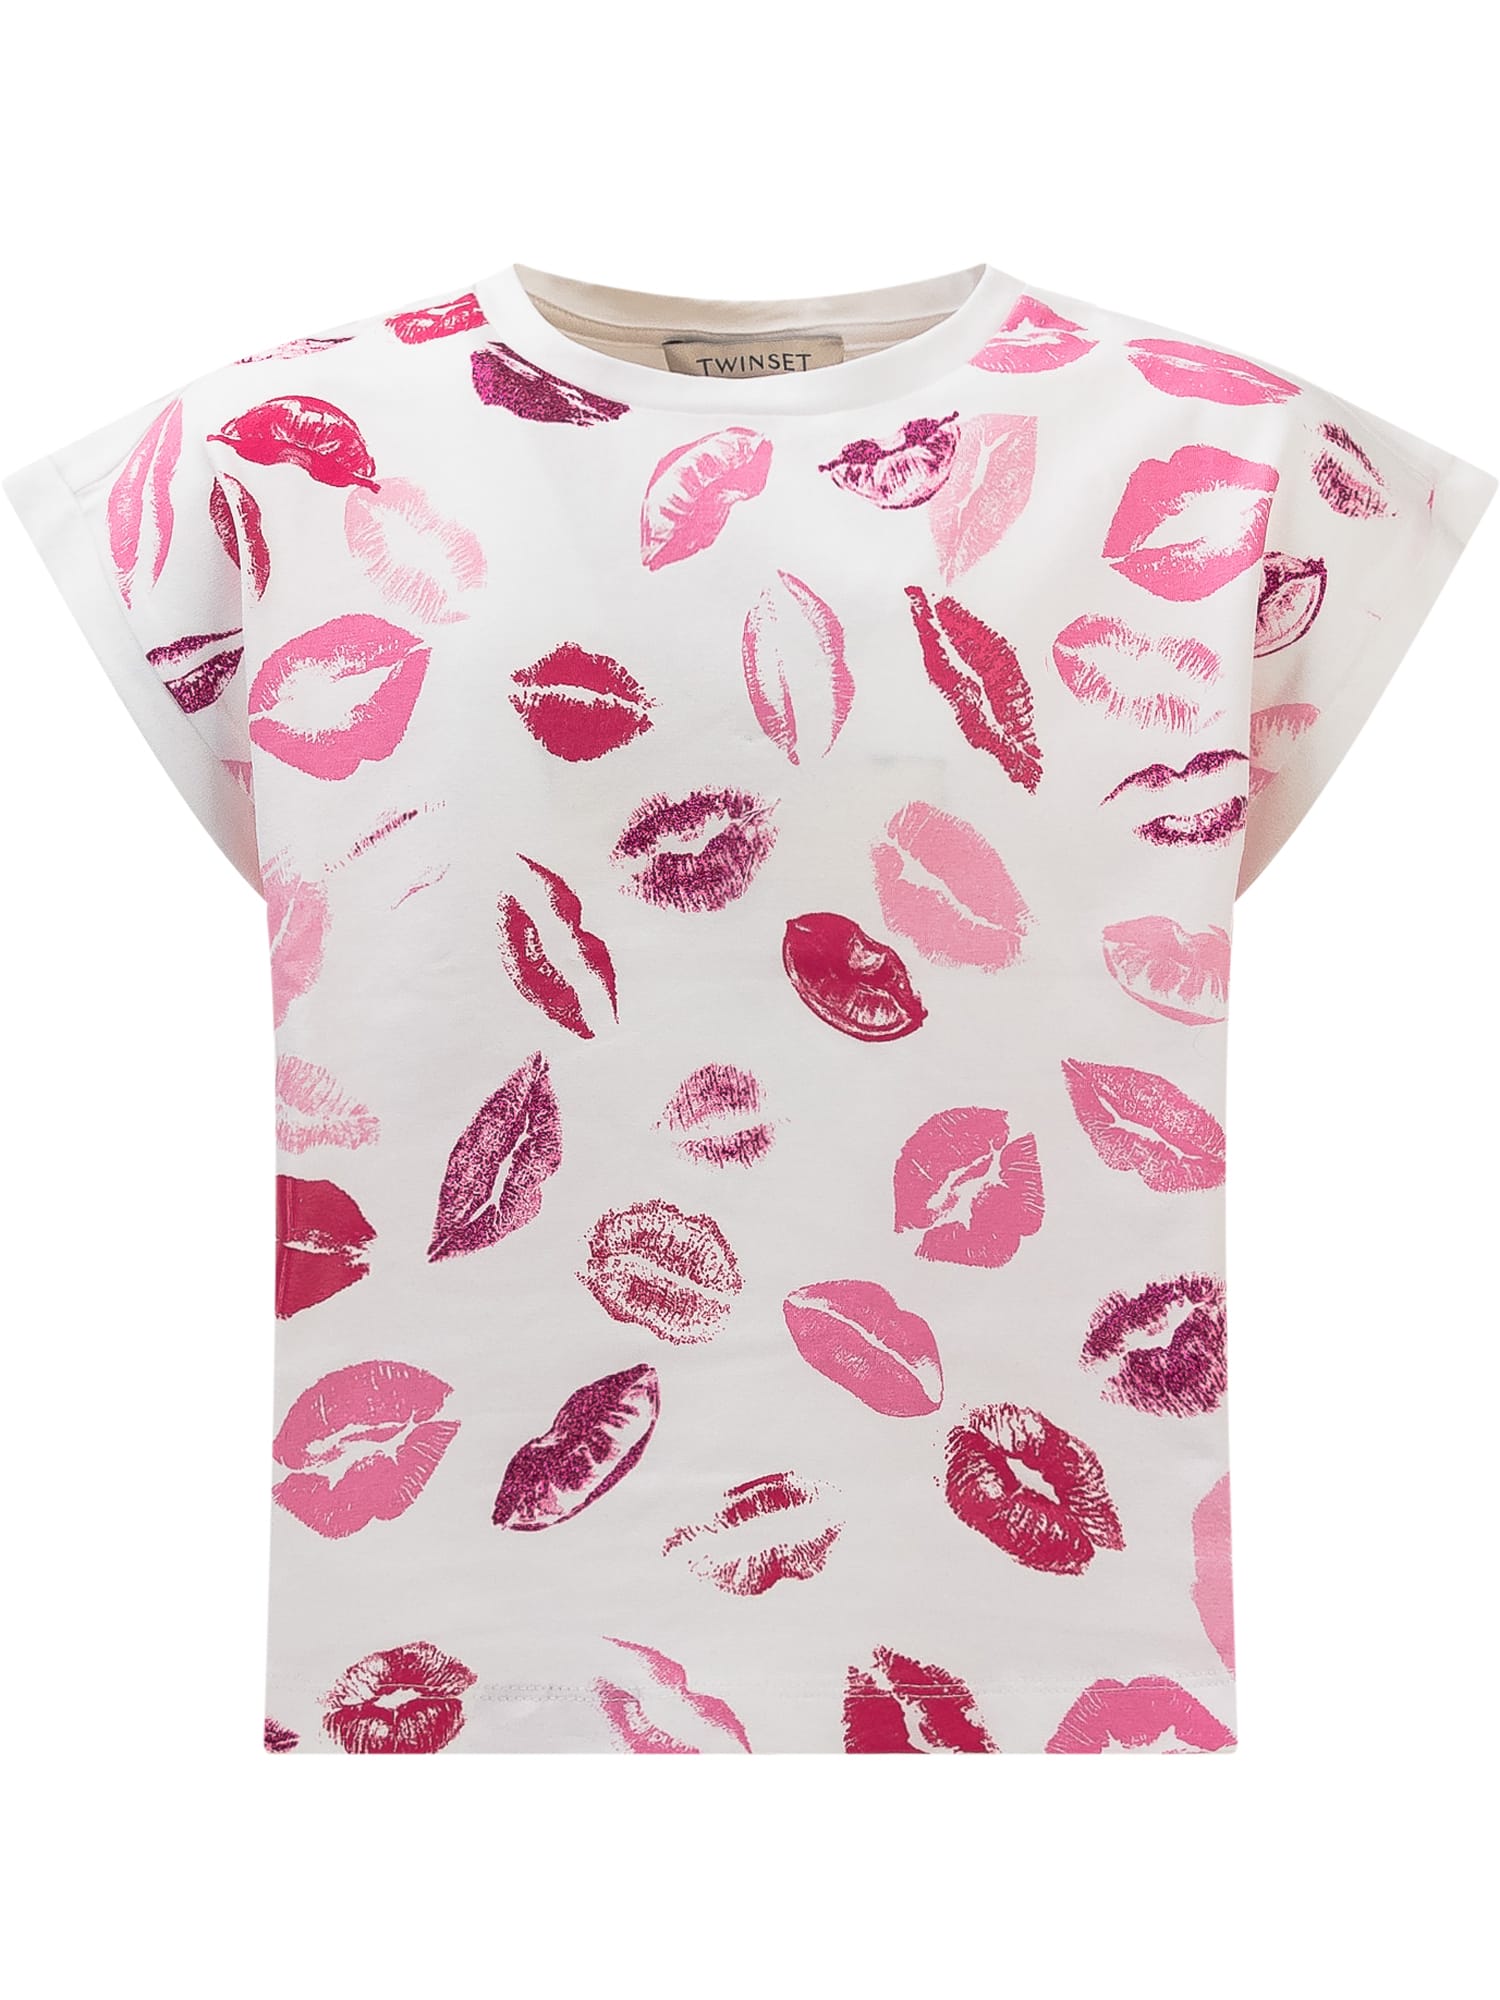 Twinset Kids' Kiss T-shirt In Kiss All Over